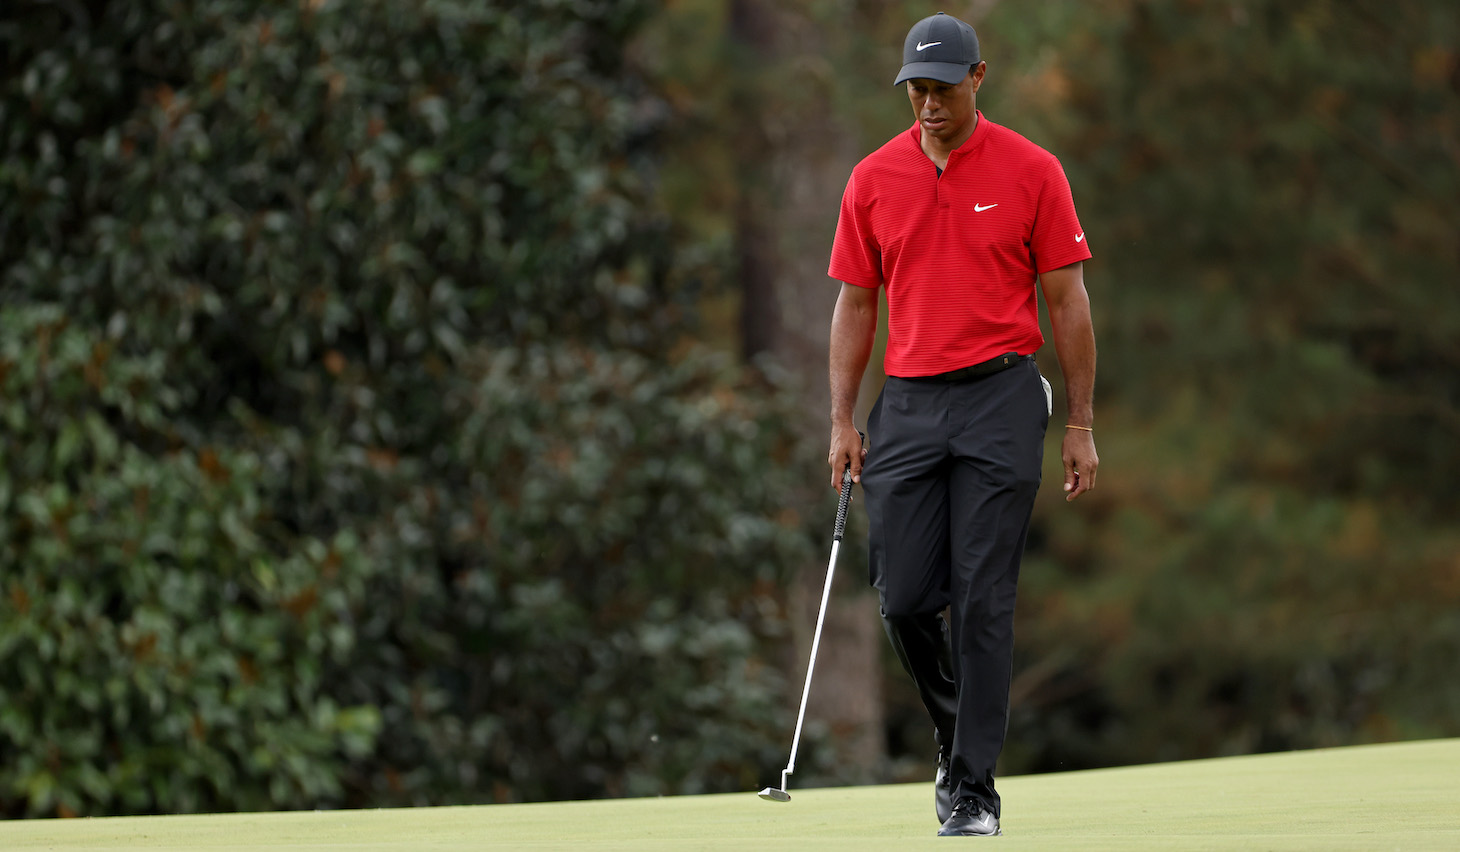 AUGUSTA, GEORGIA - NOVEMBER 15: Tiger Woods of the United States walks on the 14th green during the final round of the Masters at Augusta National Golf Club on November 15, 2020 in Augusta, Georgia. (Photo by Jamie Squire/Getty Images)